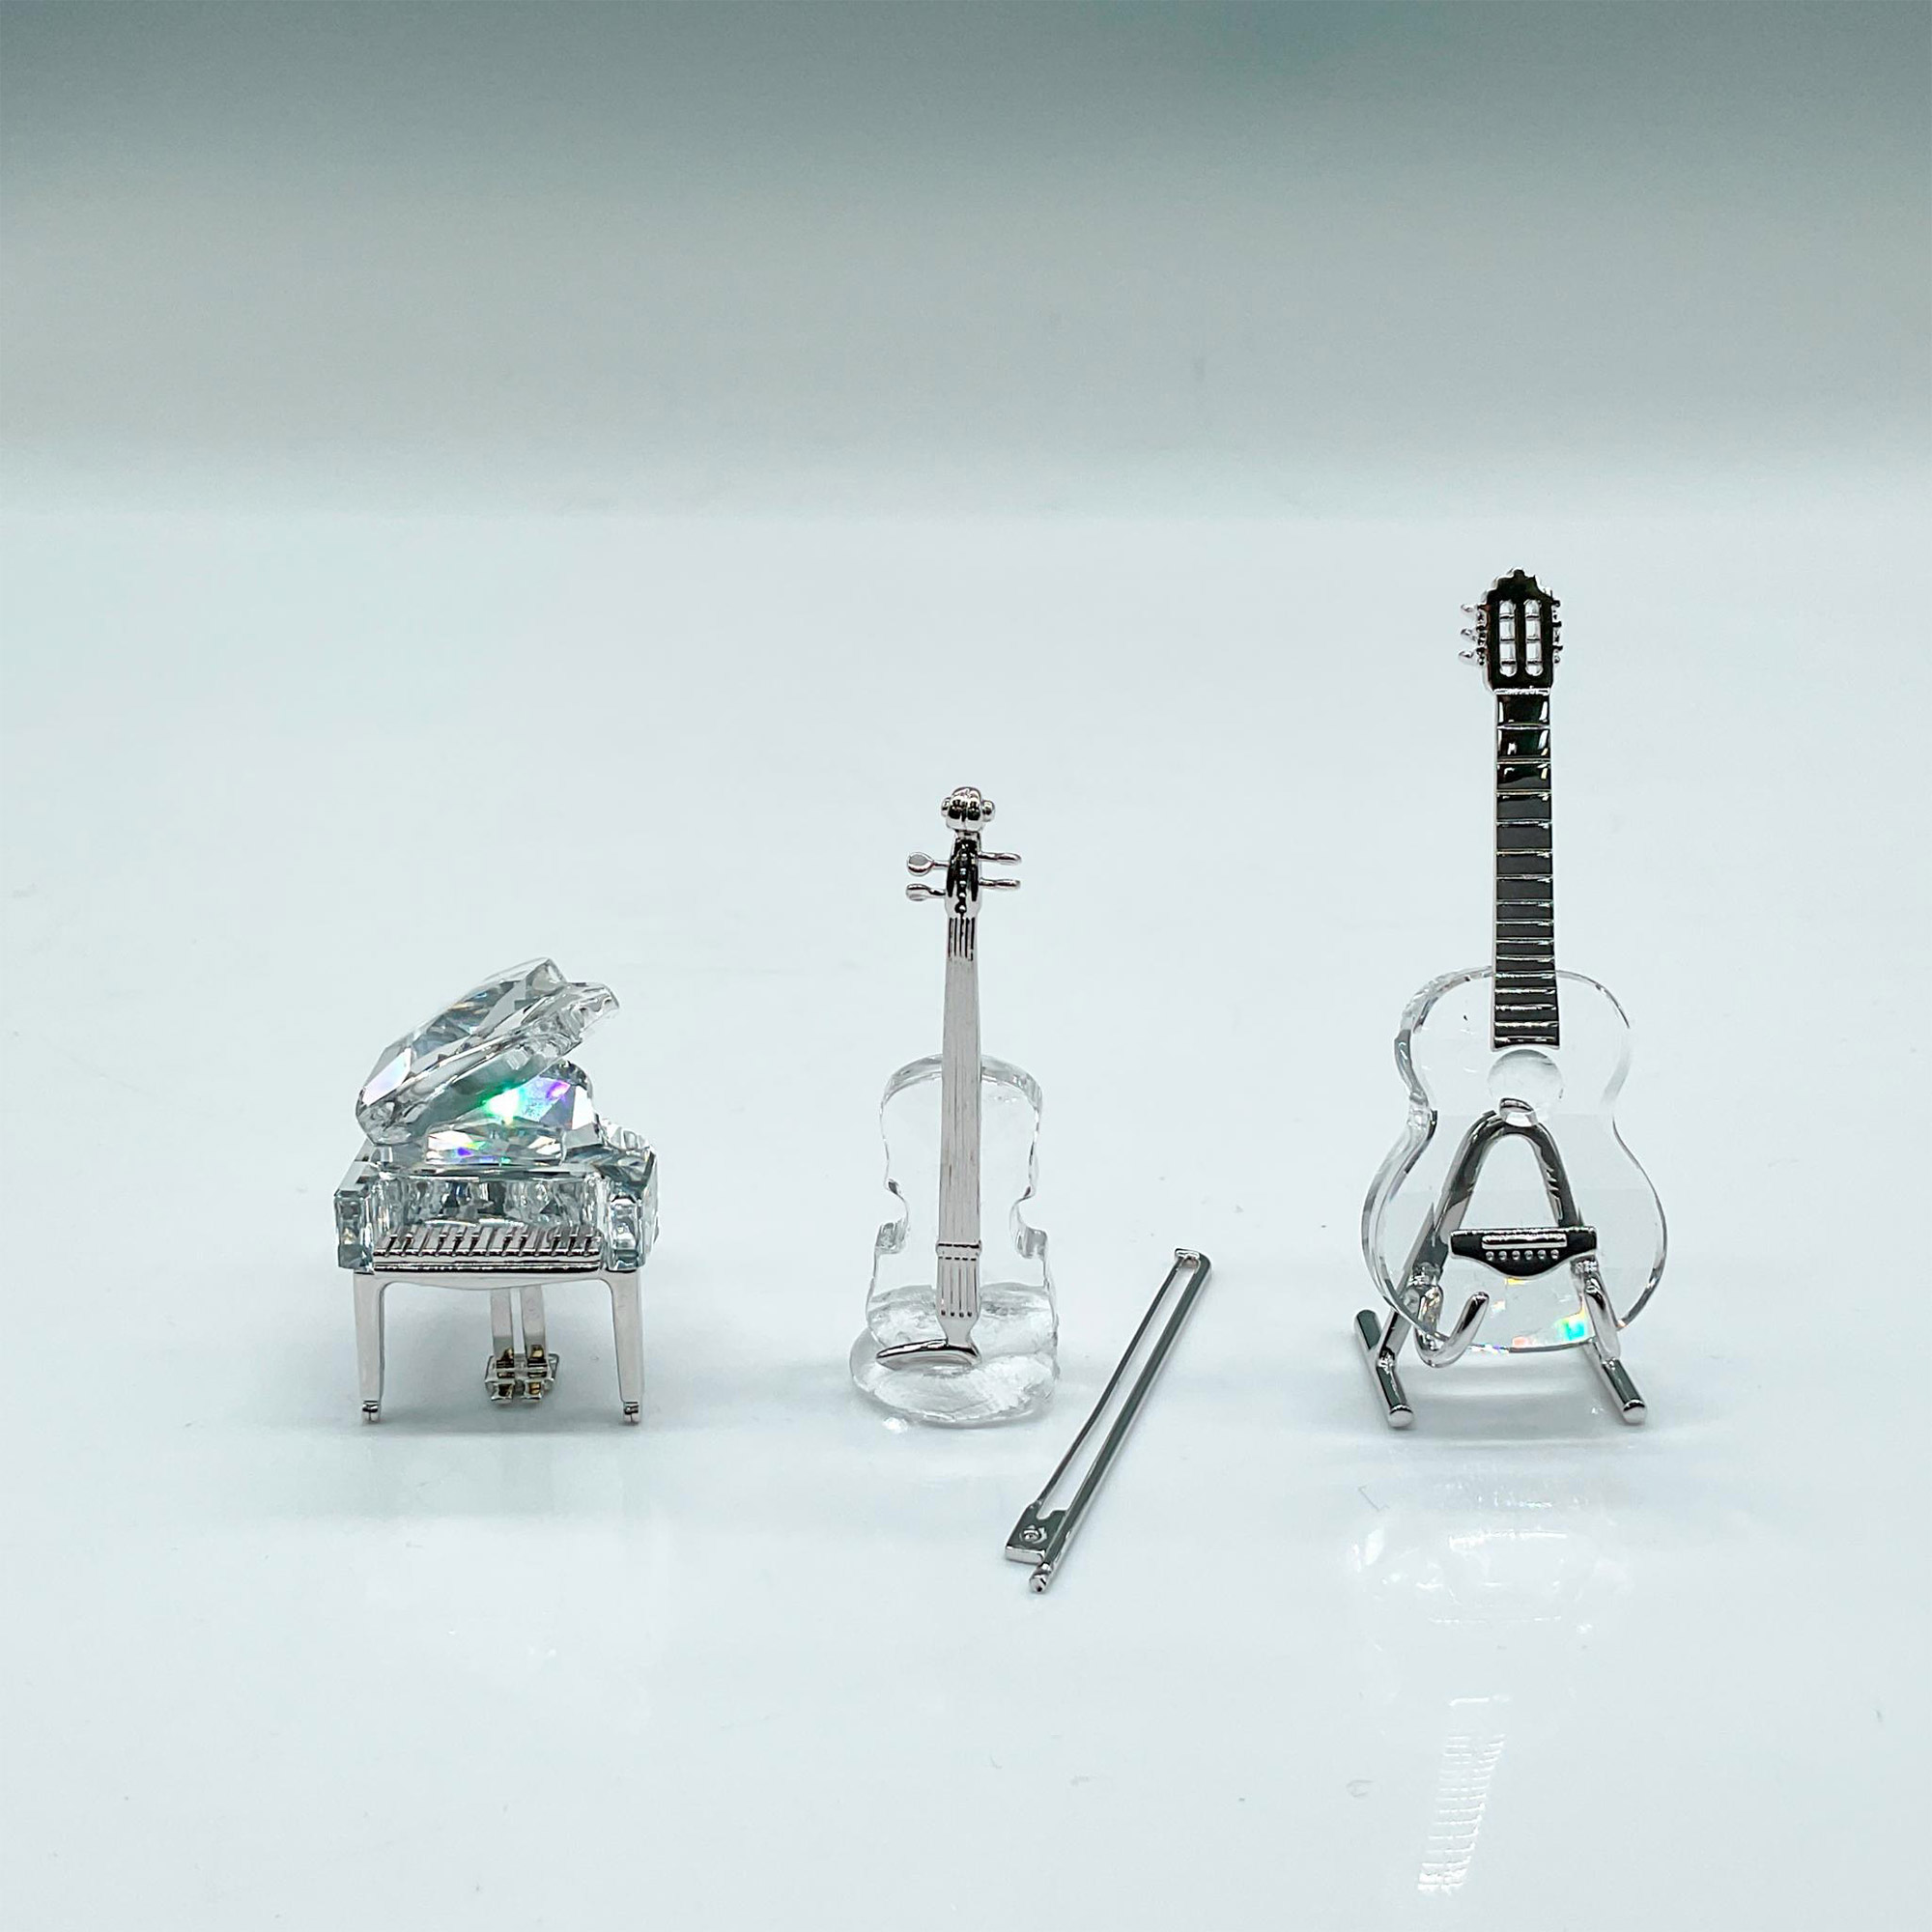 4pc Swarovski Crystal Figurines, Musical Instruments + Pin - Image 2 of 6